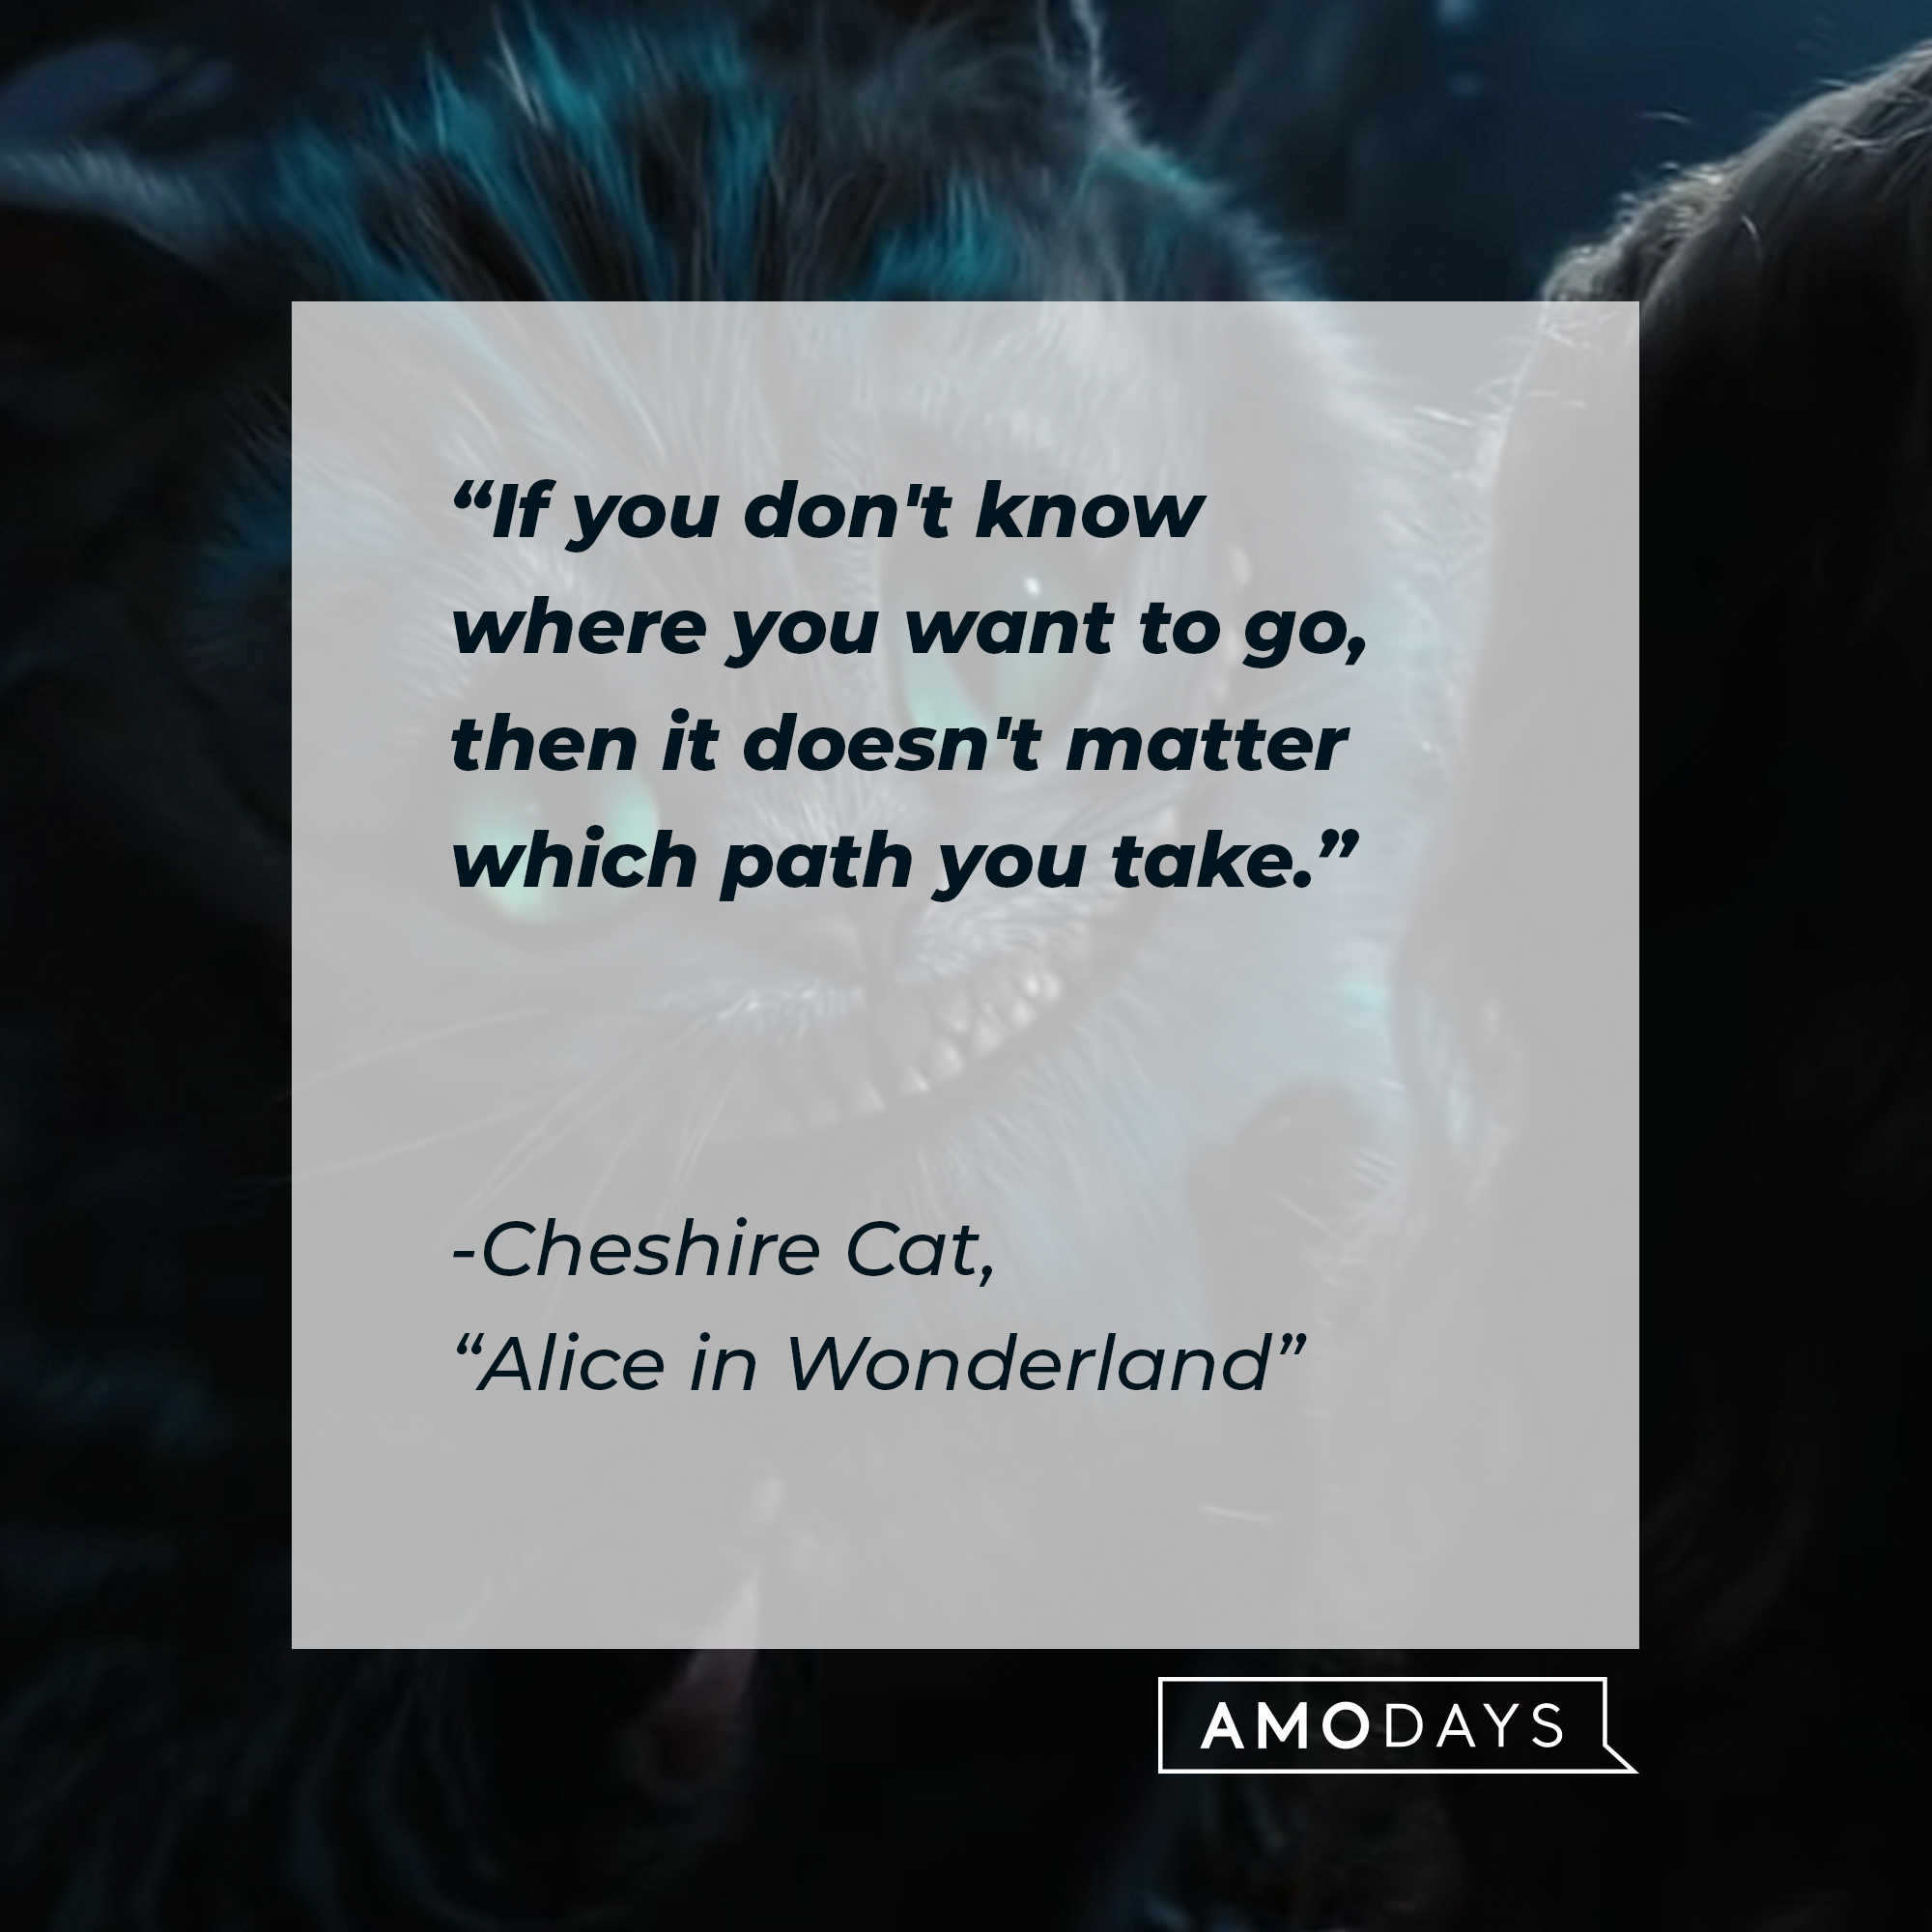 Cheshire Cat's "Alice in Wonderland" quote: "If you don't know where you want to go, then it doesn't matter which path you take." | Source: Youtube.com/DisneyUK